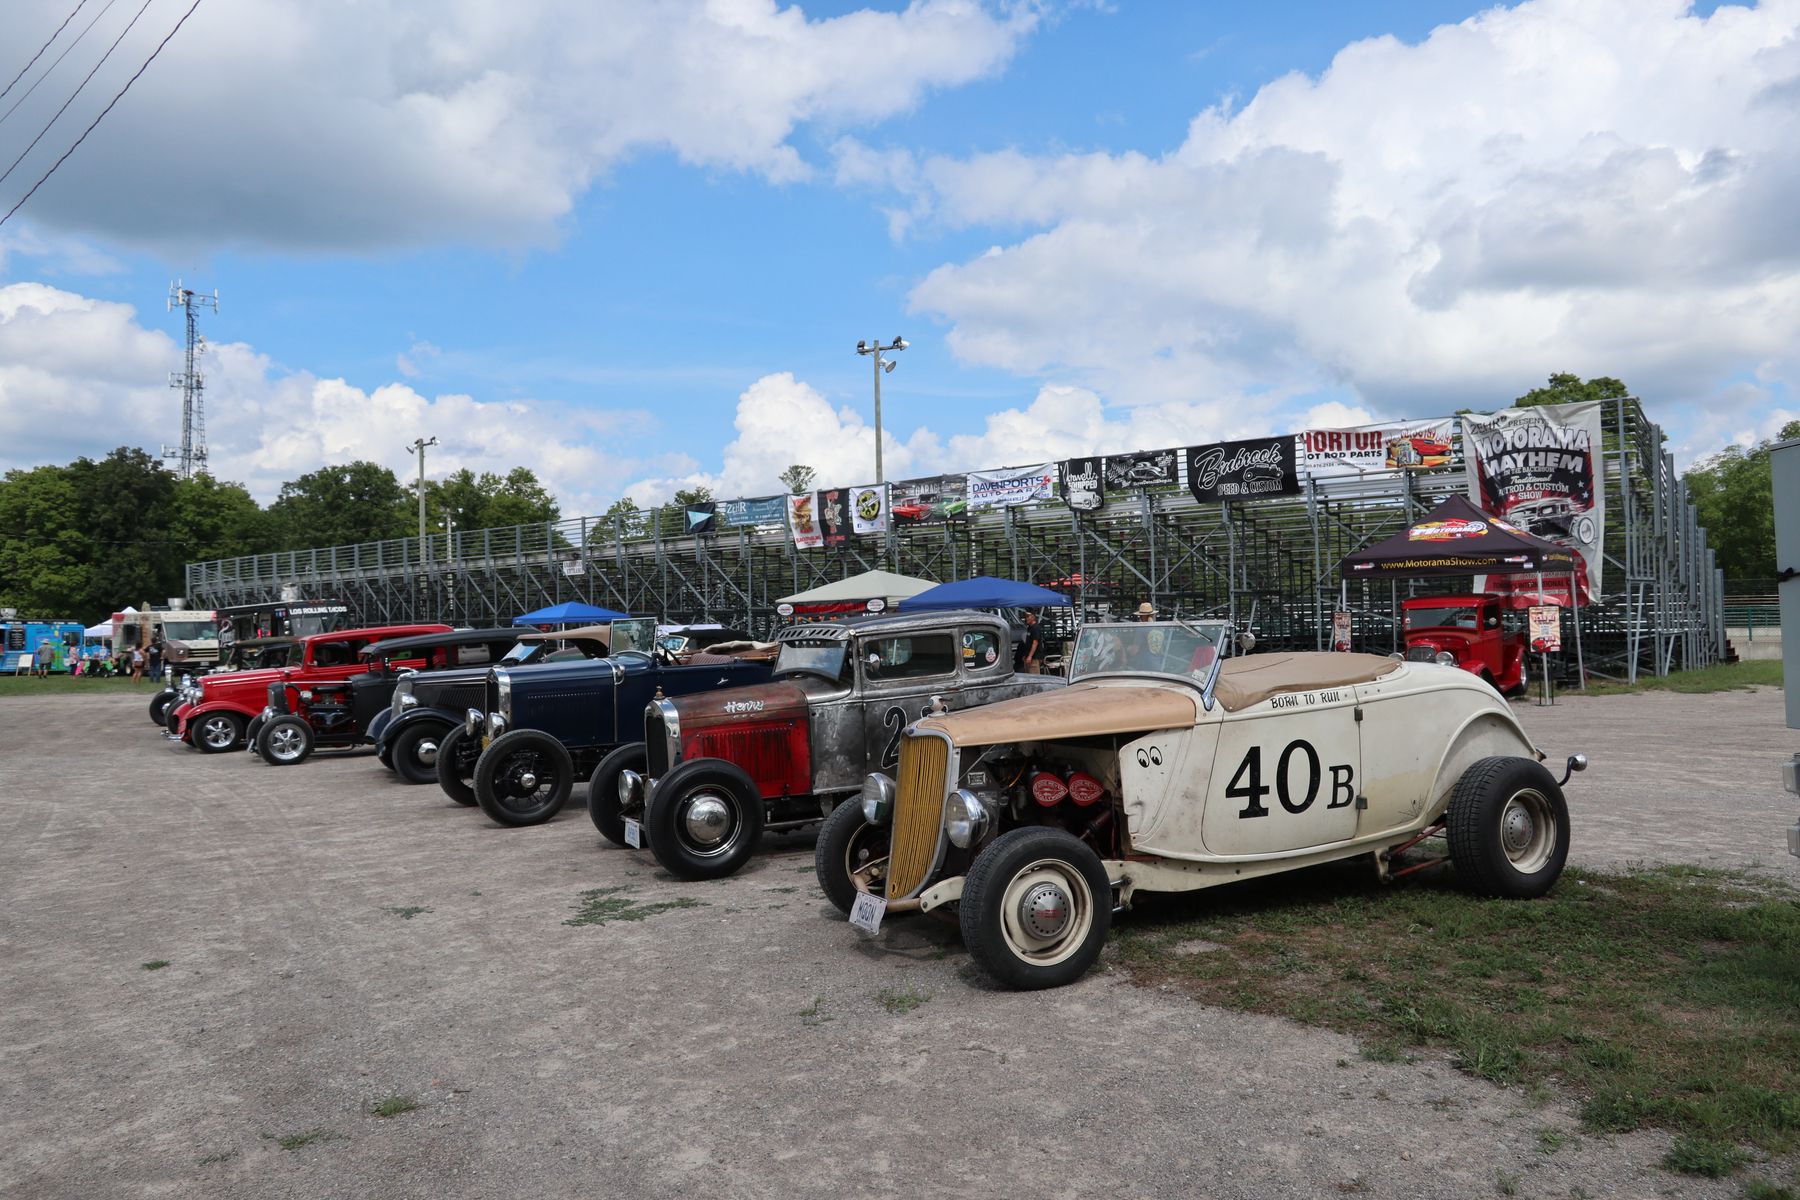 Hot rods and custom cars rule at the Jalopy Jam Up